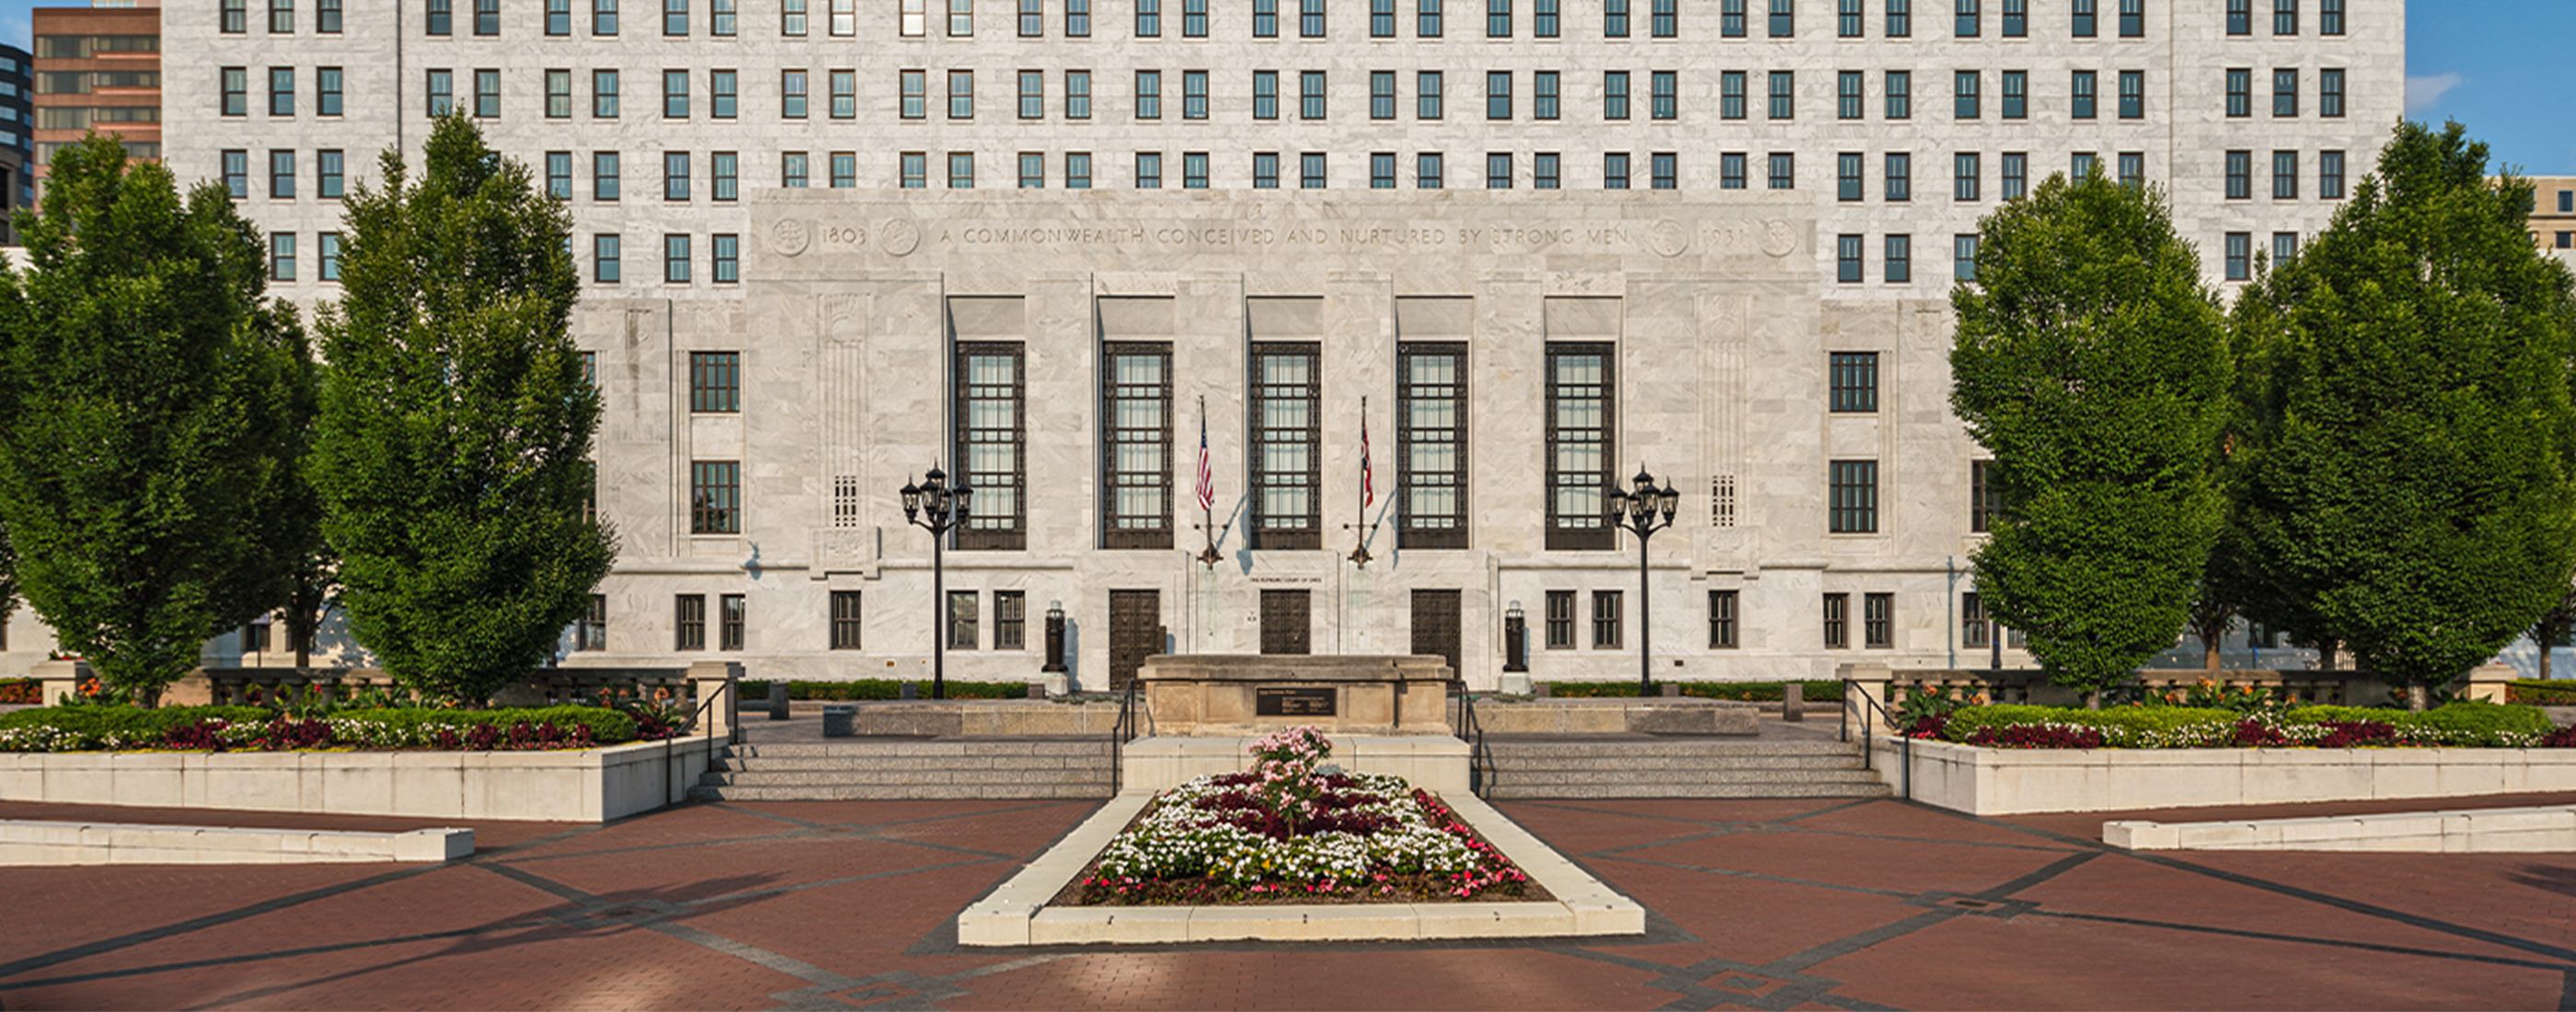 The Supreme Court of Ohio's entrance and exterior plaza in Columbus, Ohio